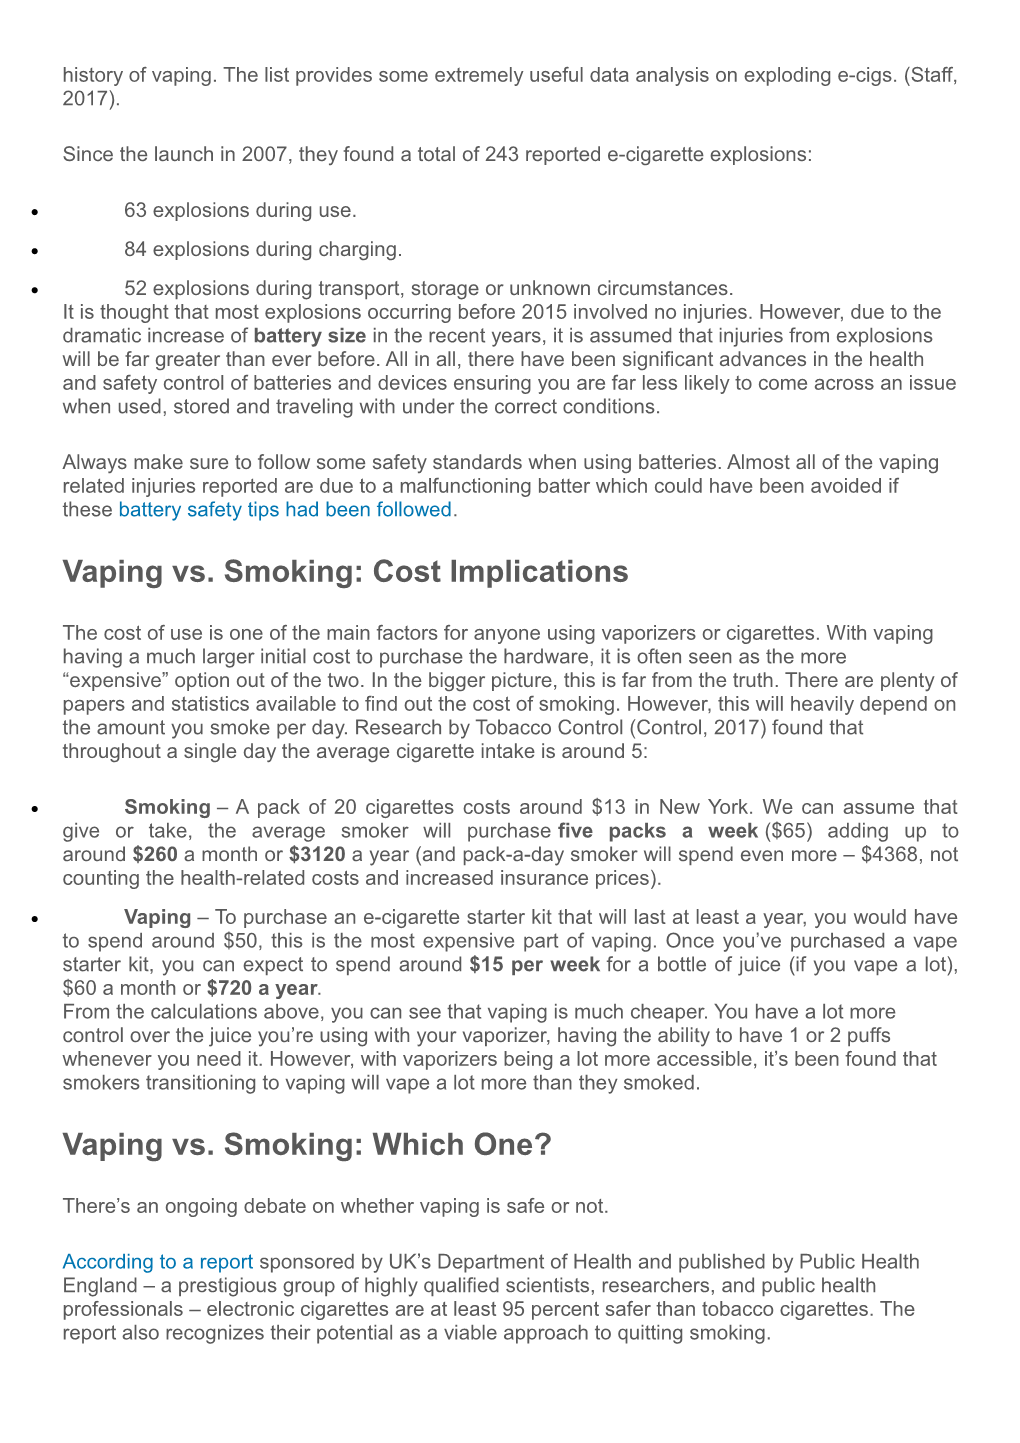 Vaping Vs. Smoking the Chemicals